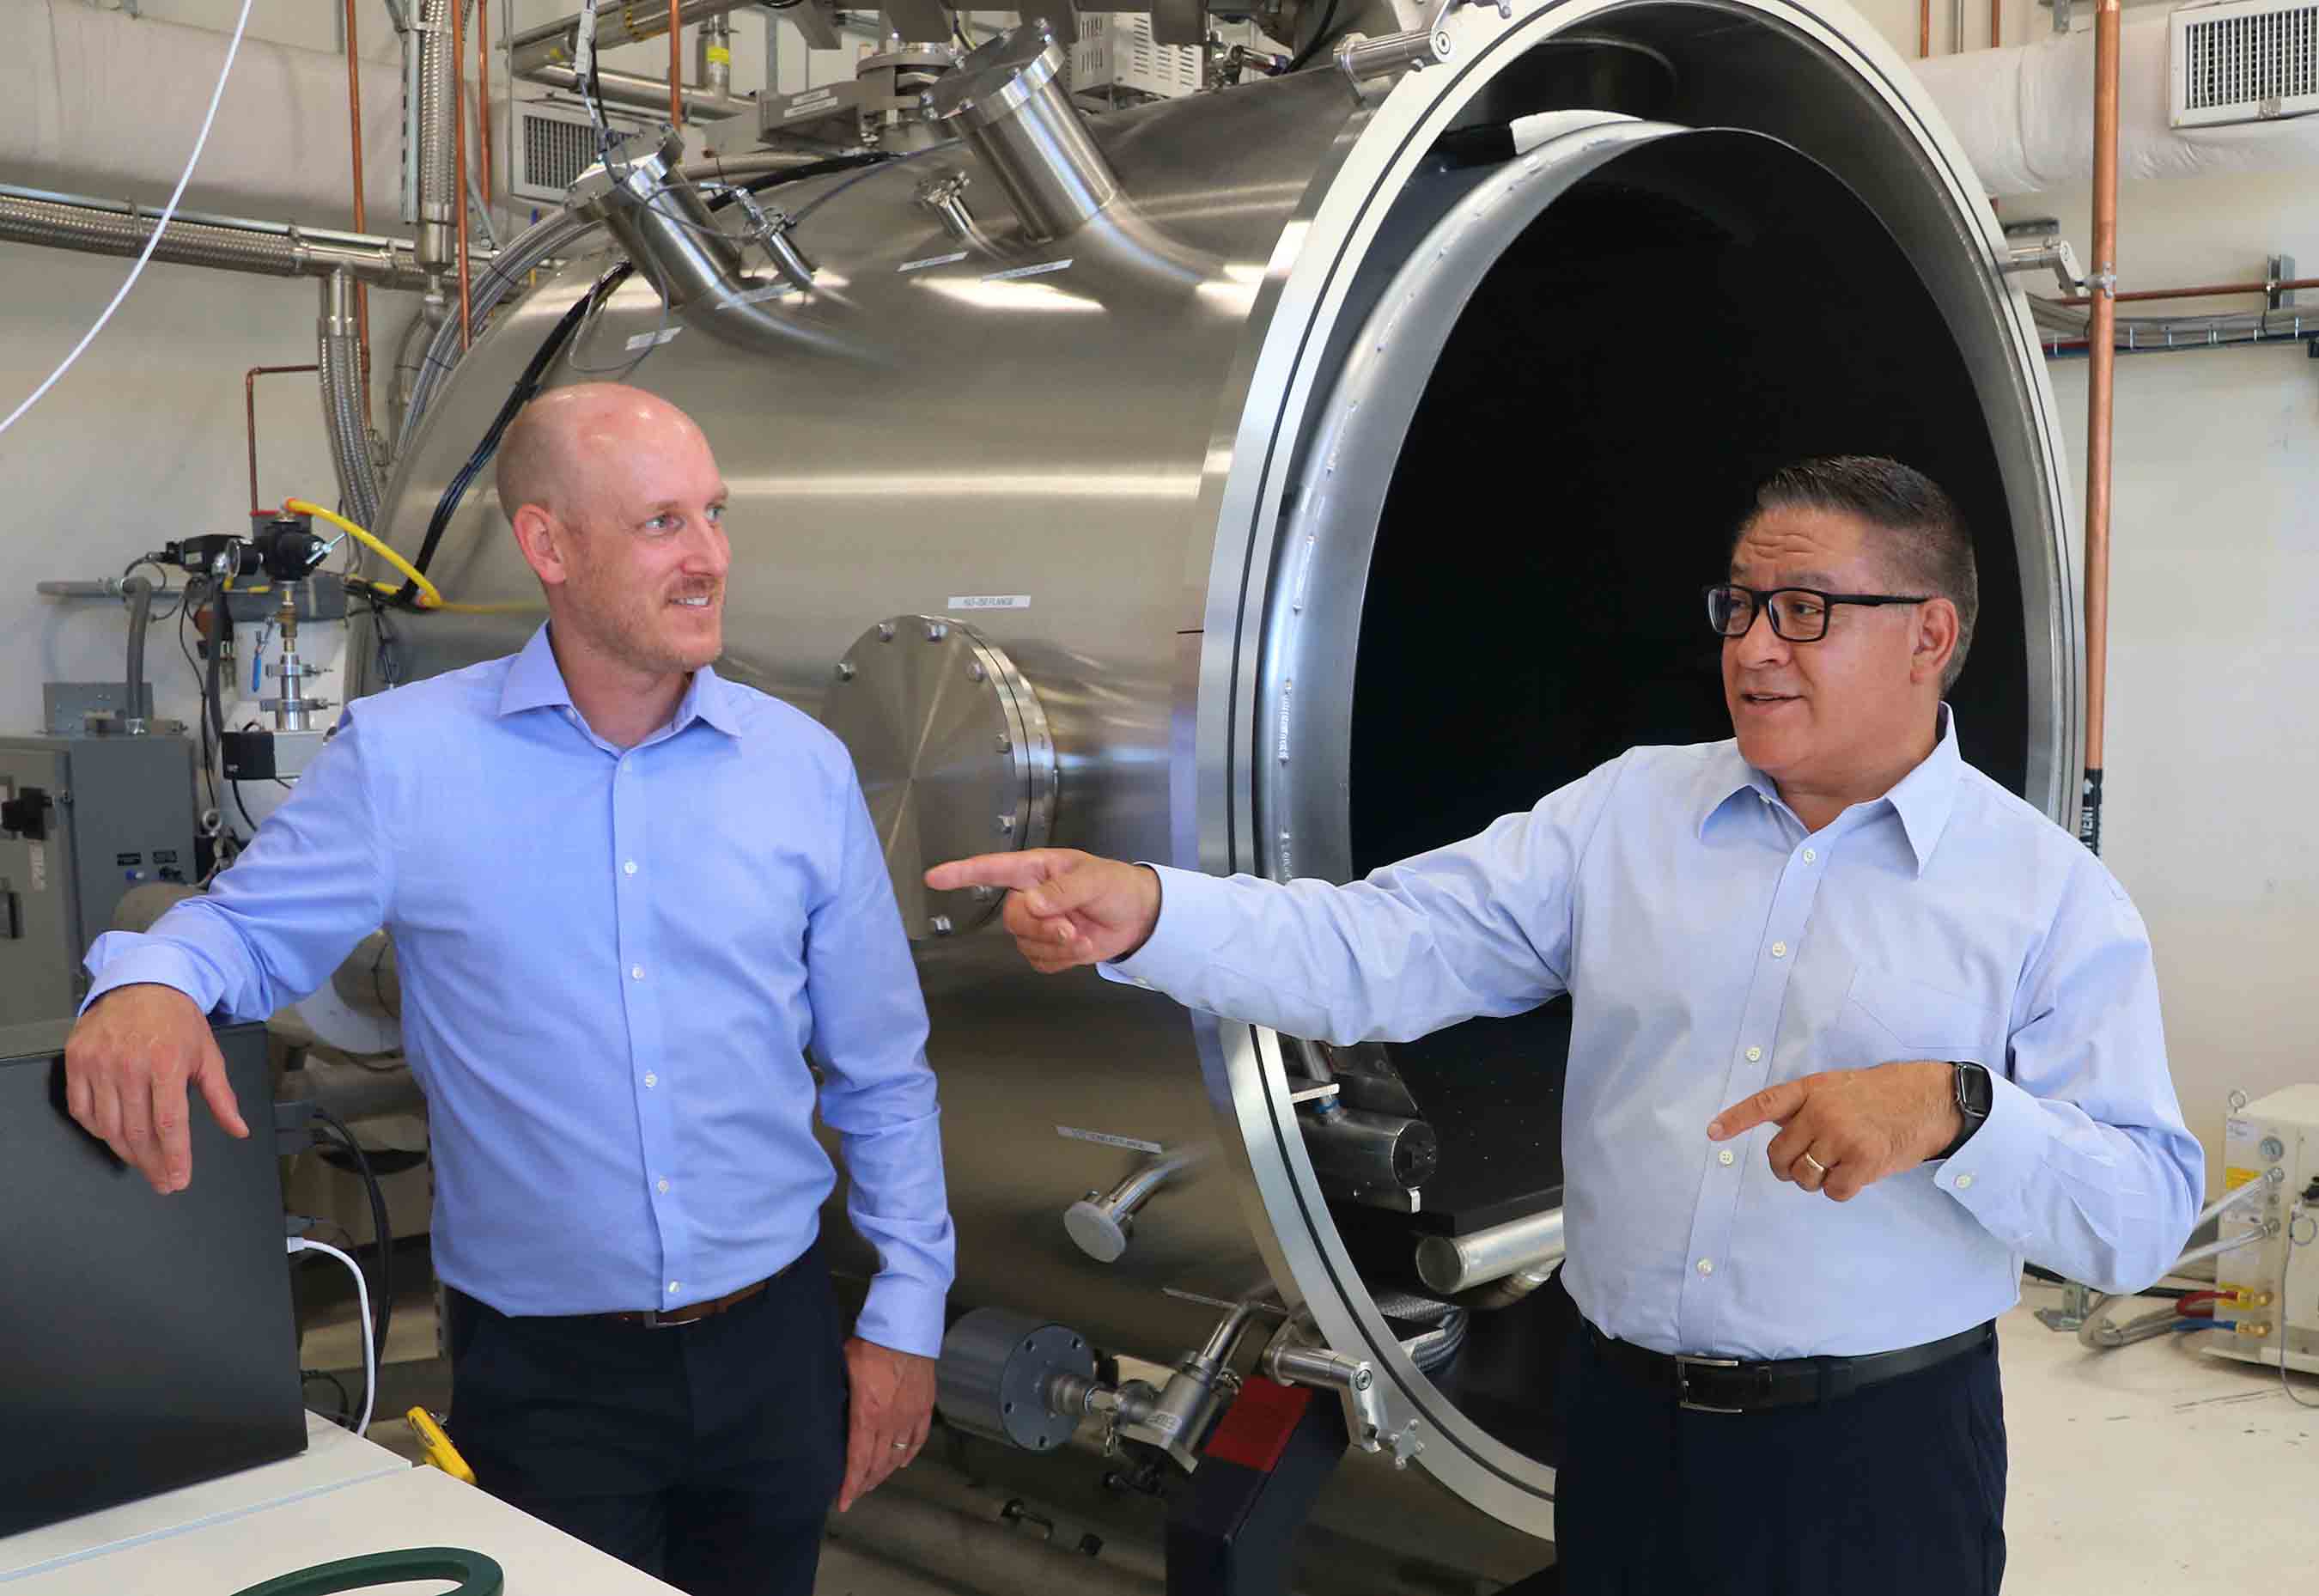 Aerospace engineering lecturer Cole Saucier, left, talks with U.S. Congressman Salud Carbajal at the dedication of the new Thermal Vacuum Chamber in the Advanced Technologies Lab.